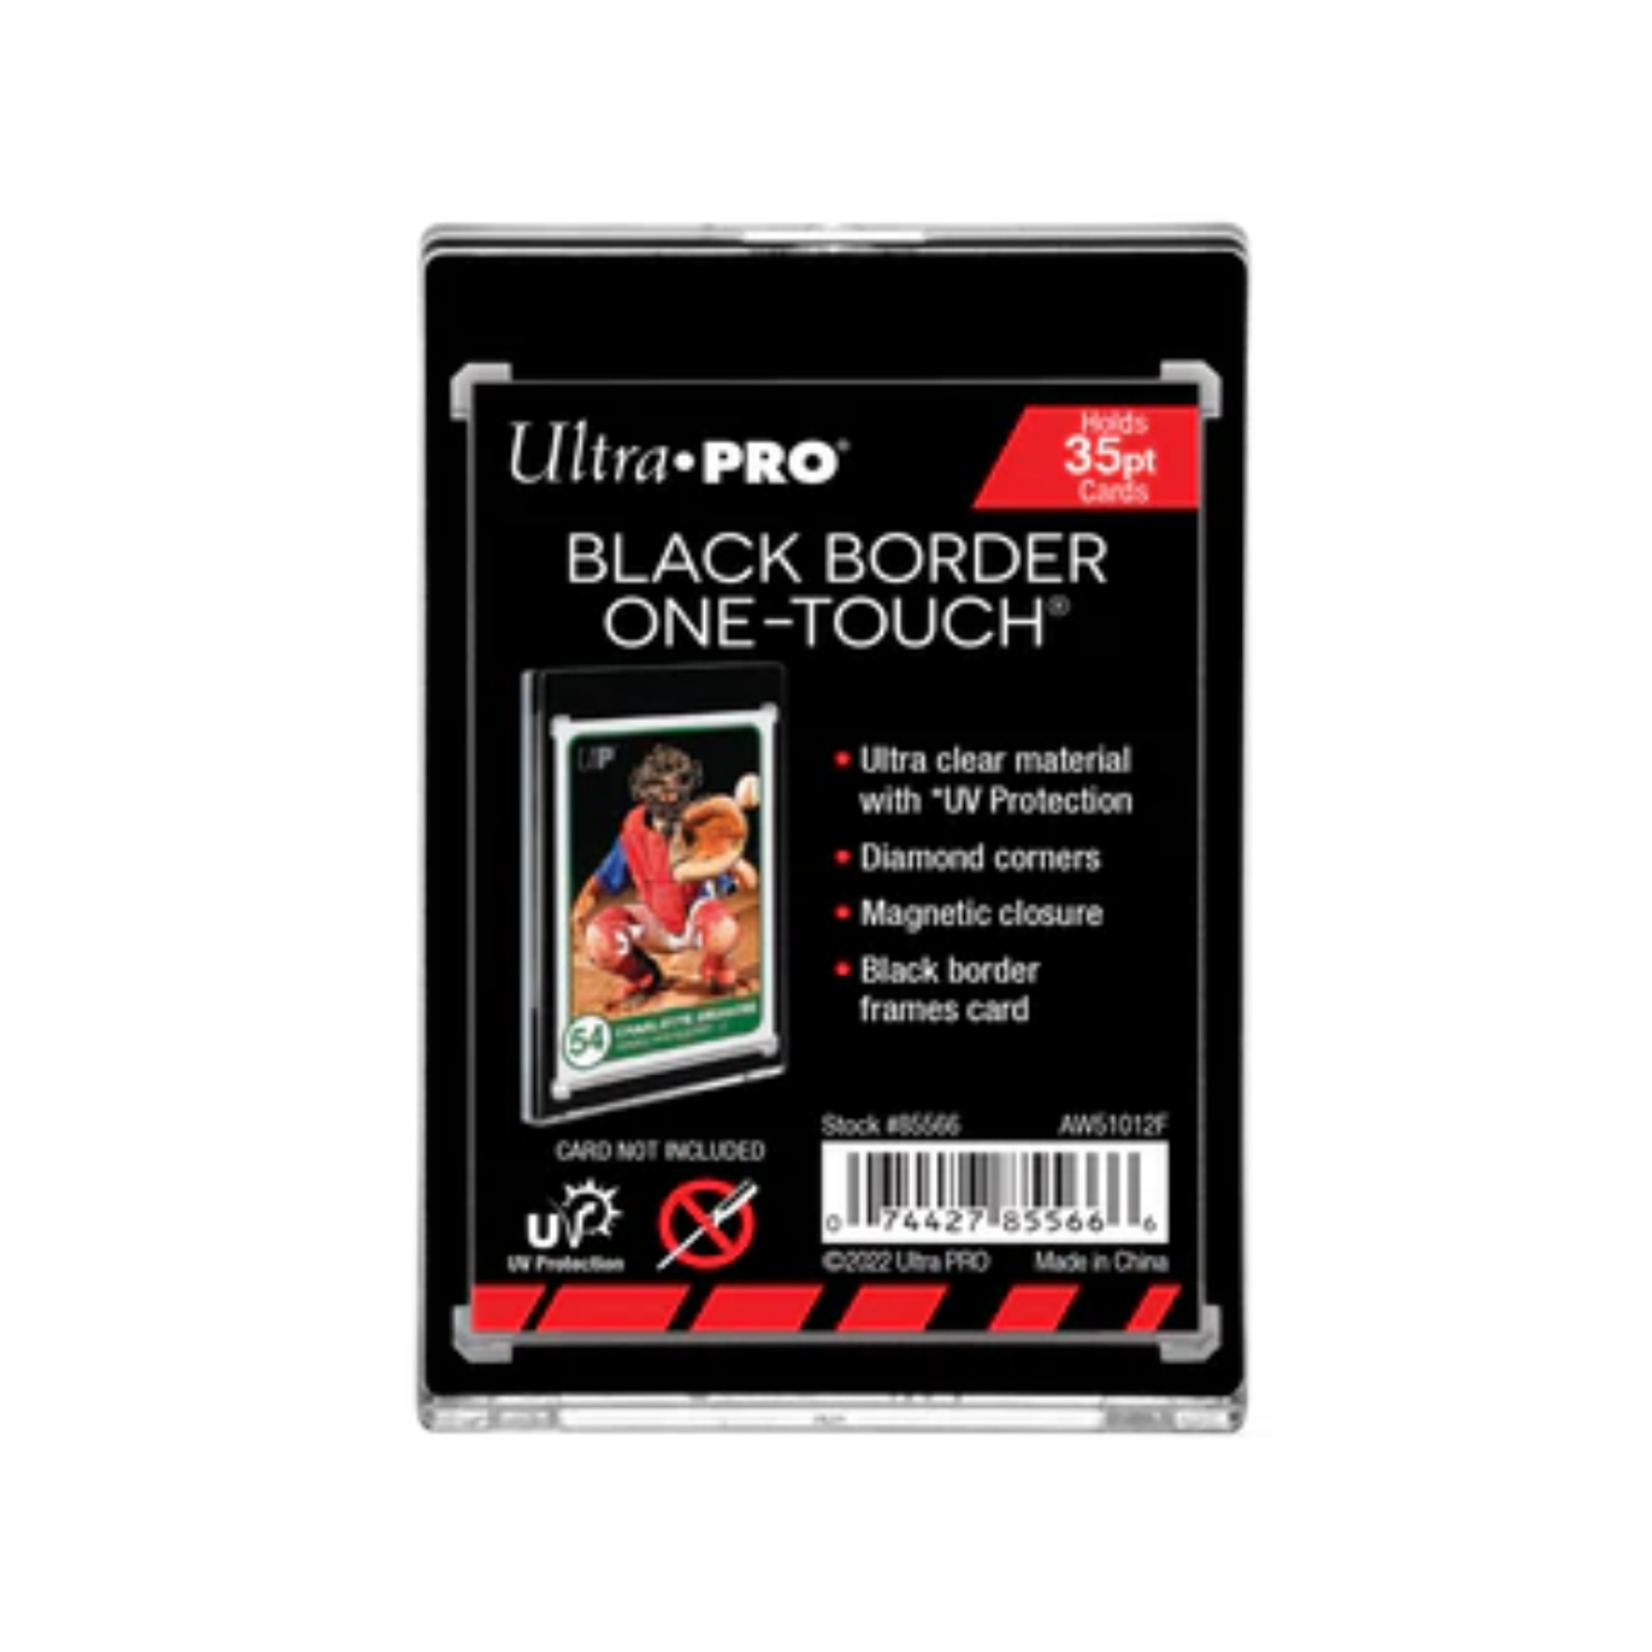 Ultra Pro One-Touch Black Border 35pt